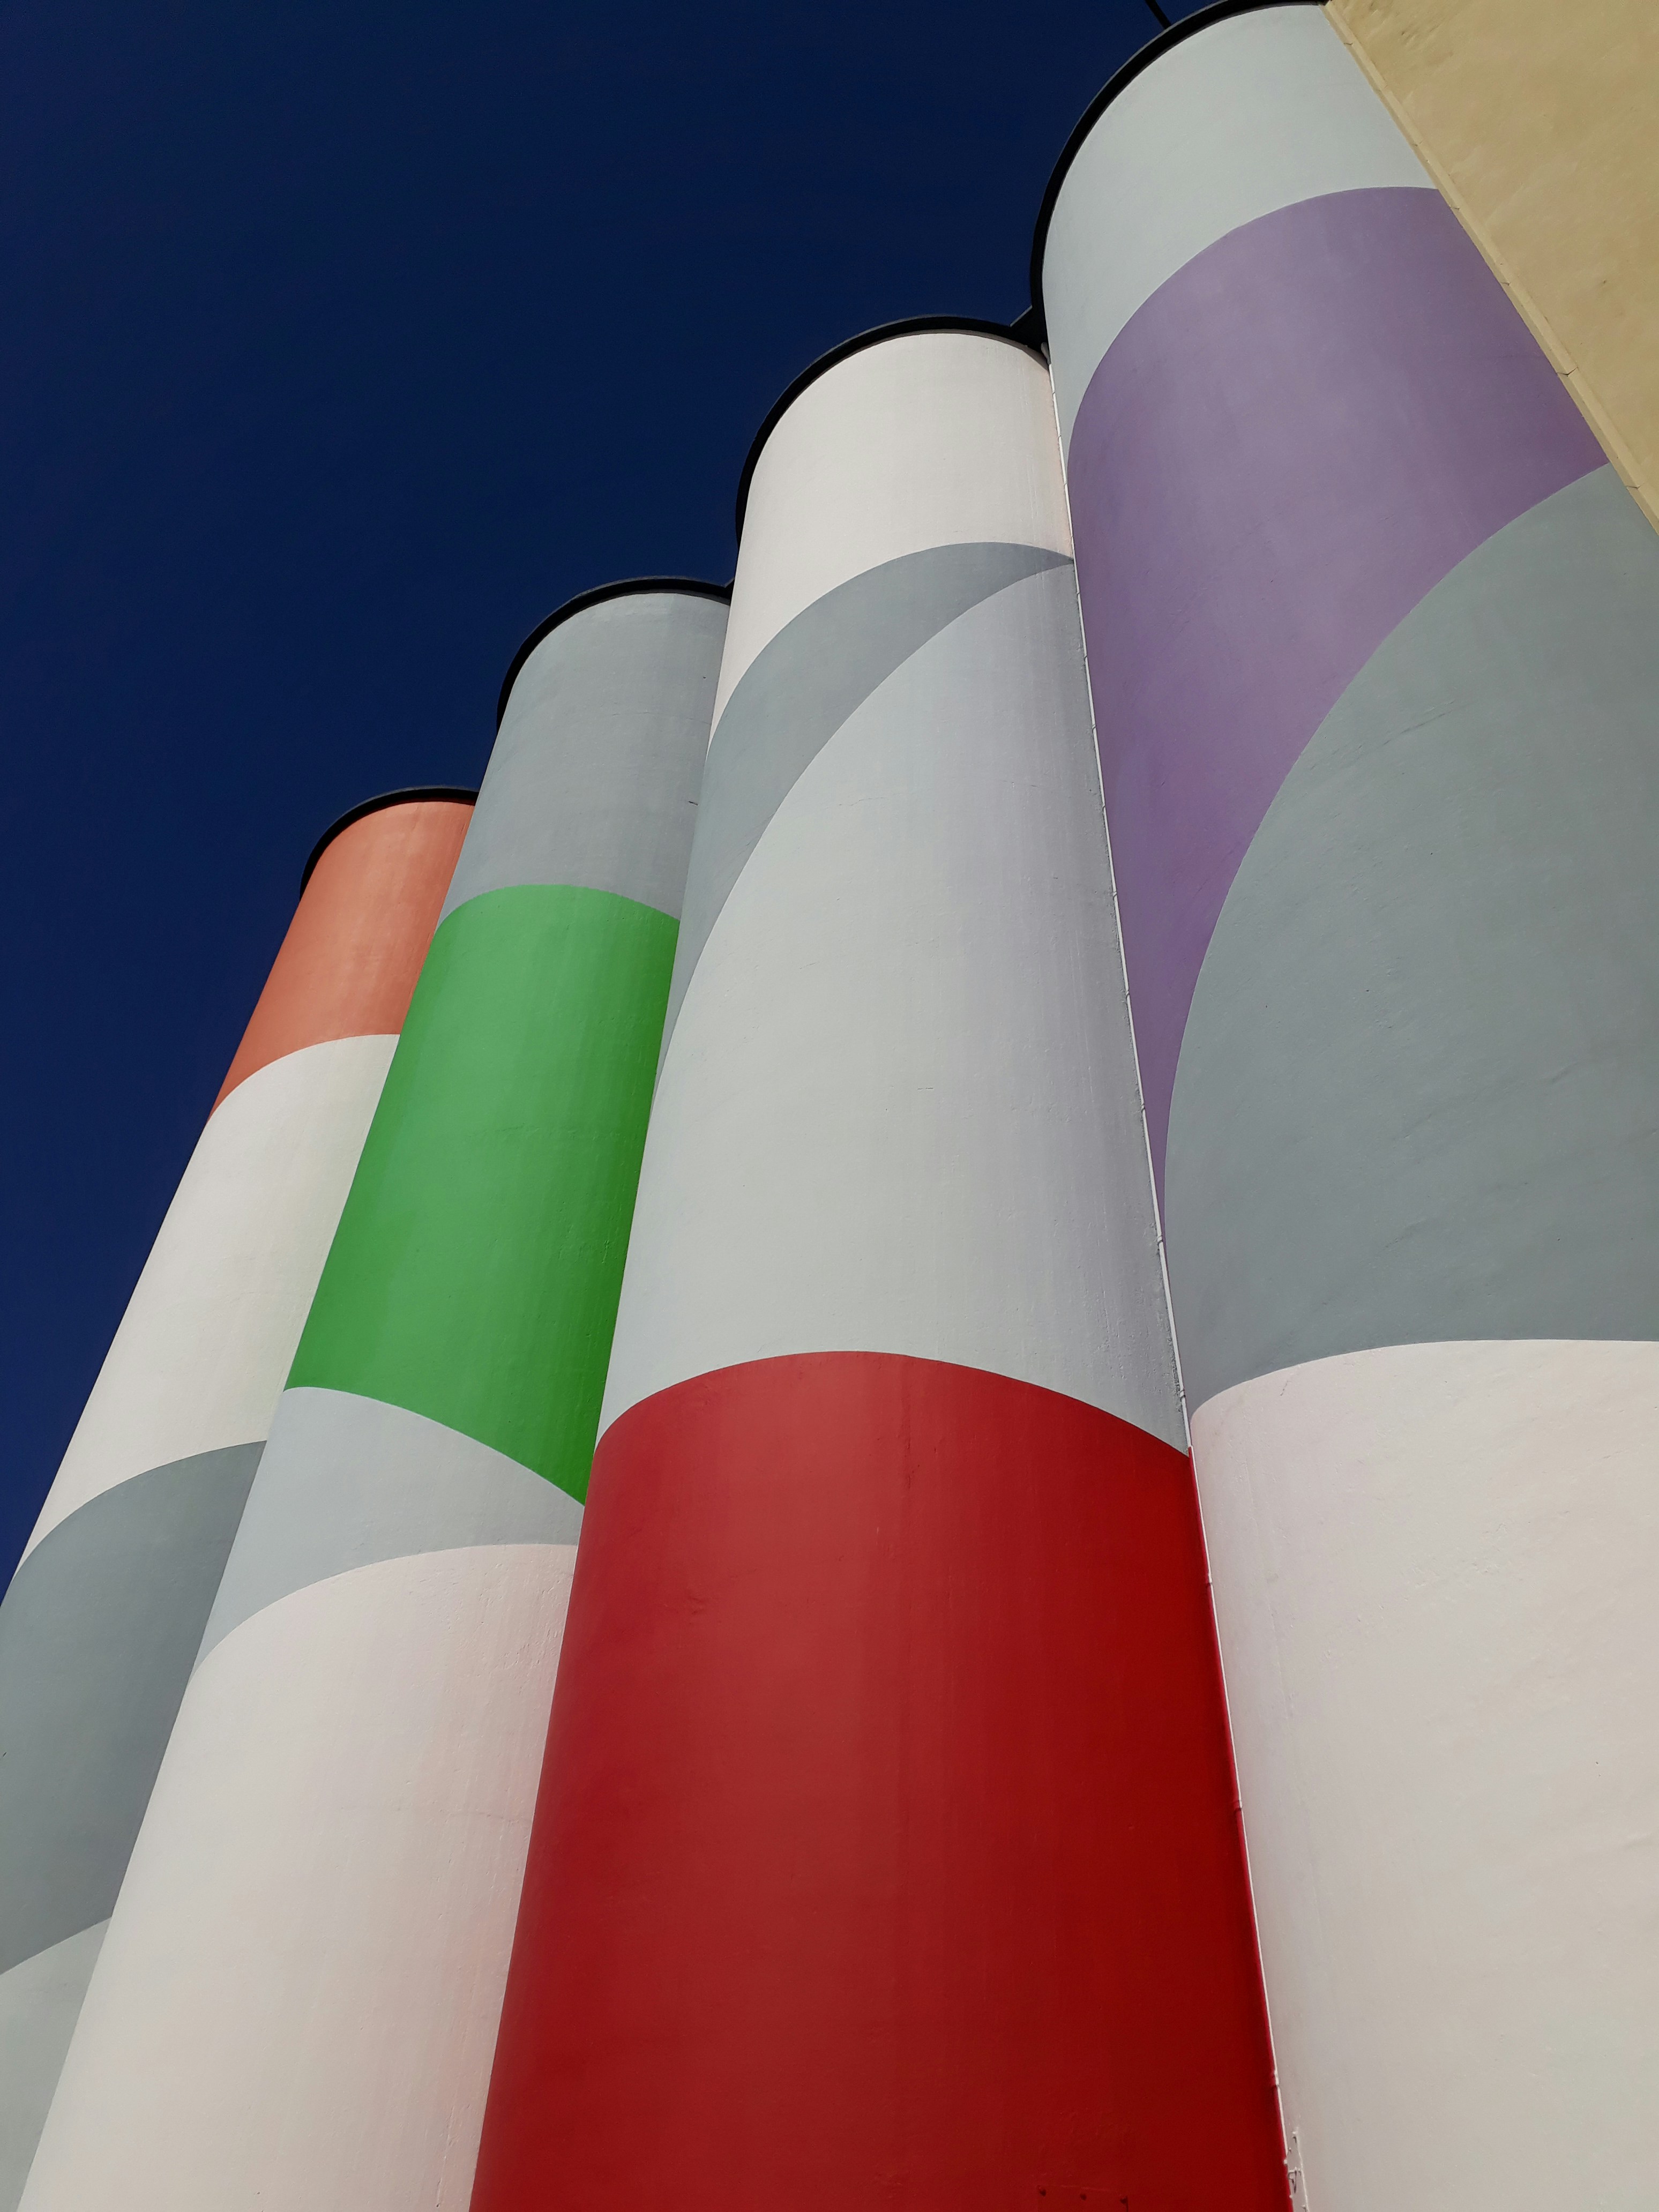 Construction of silos, painted in various colors, refurbished to now function as a museum. The exterior walls are painted in white, gray, red, violet, green, and orange